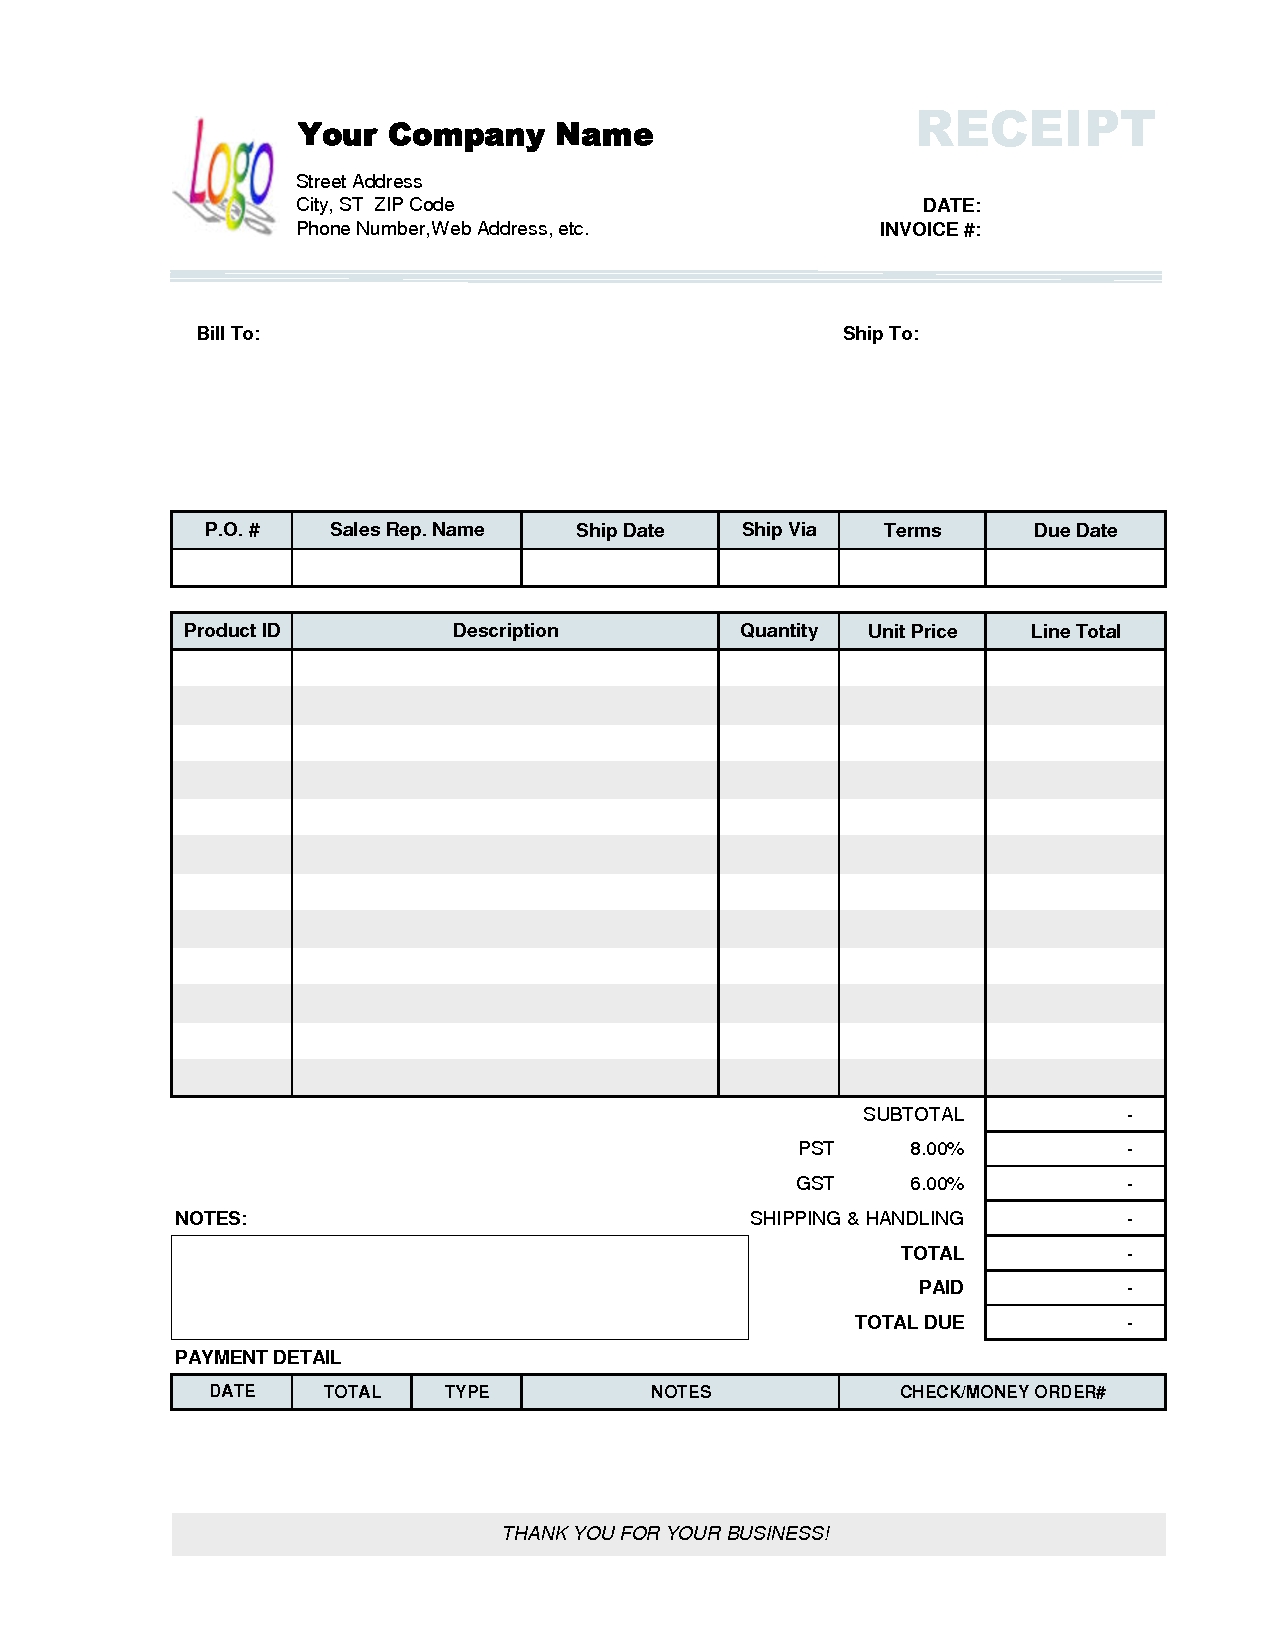 receipt bill bill receipt template bill receipt format bill invoices and receipts